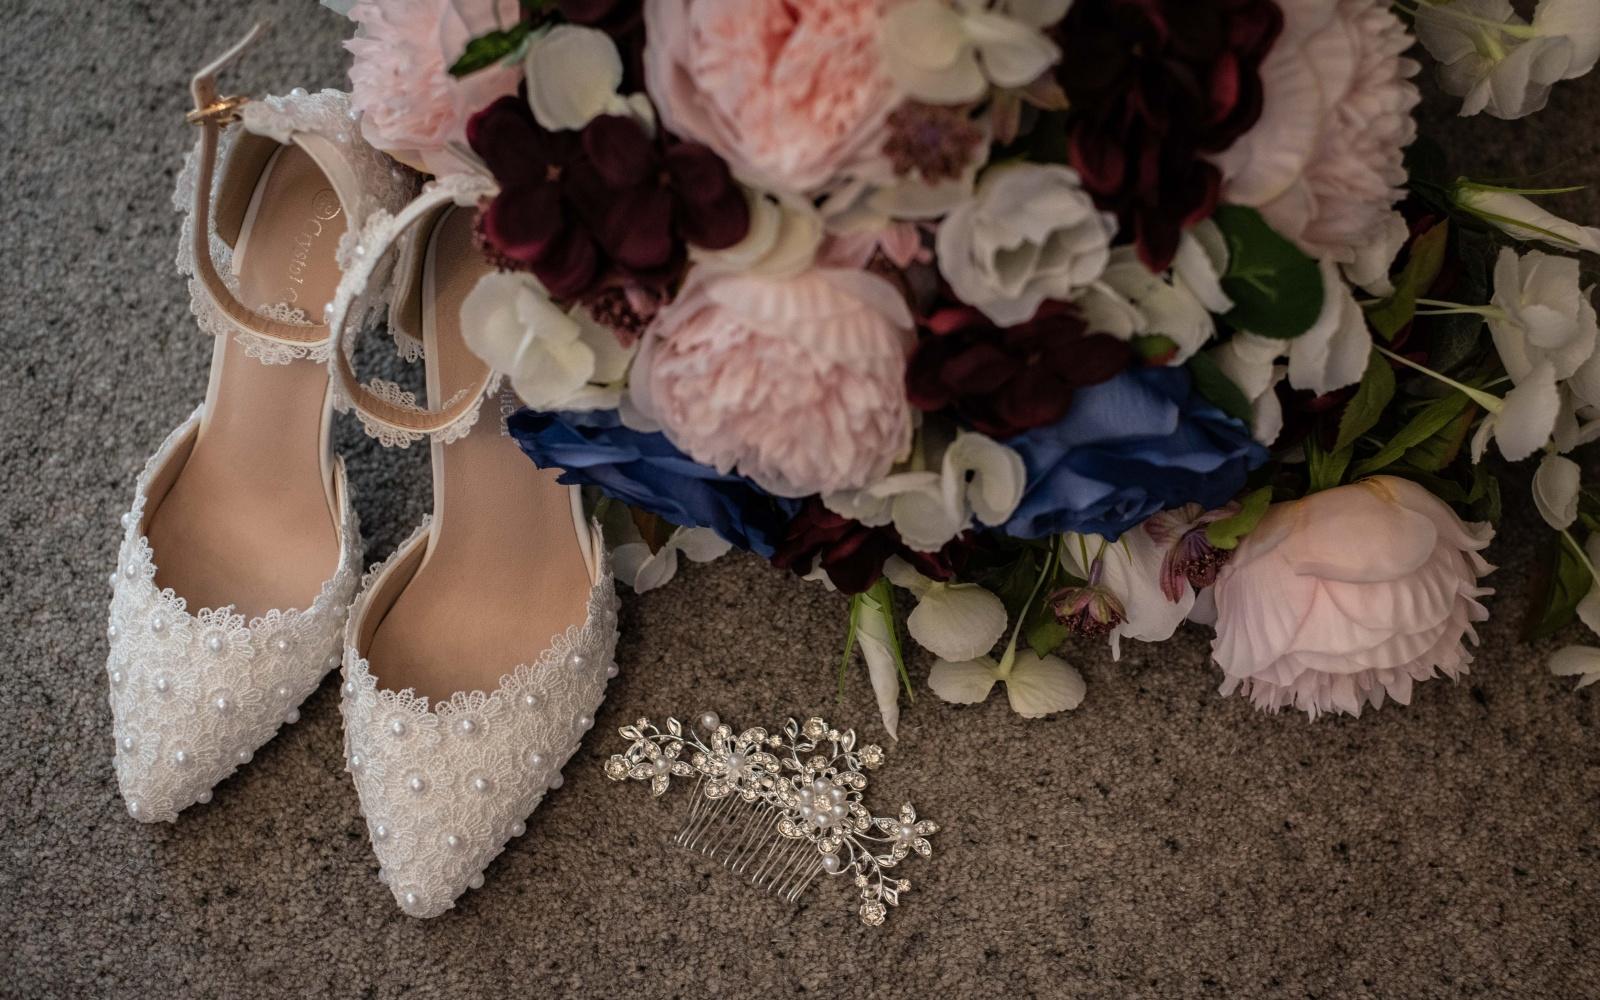 Real Wedding Strike A Pose Photography Wiltshire wedding photographer Kingscote Barn Tetbury Gloucestershire bridal shoes brides bouquet delicate hair slide